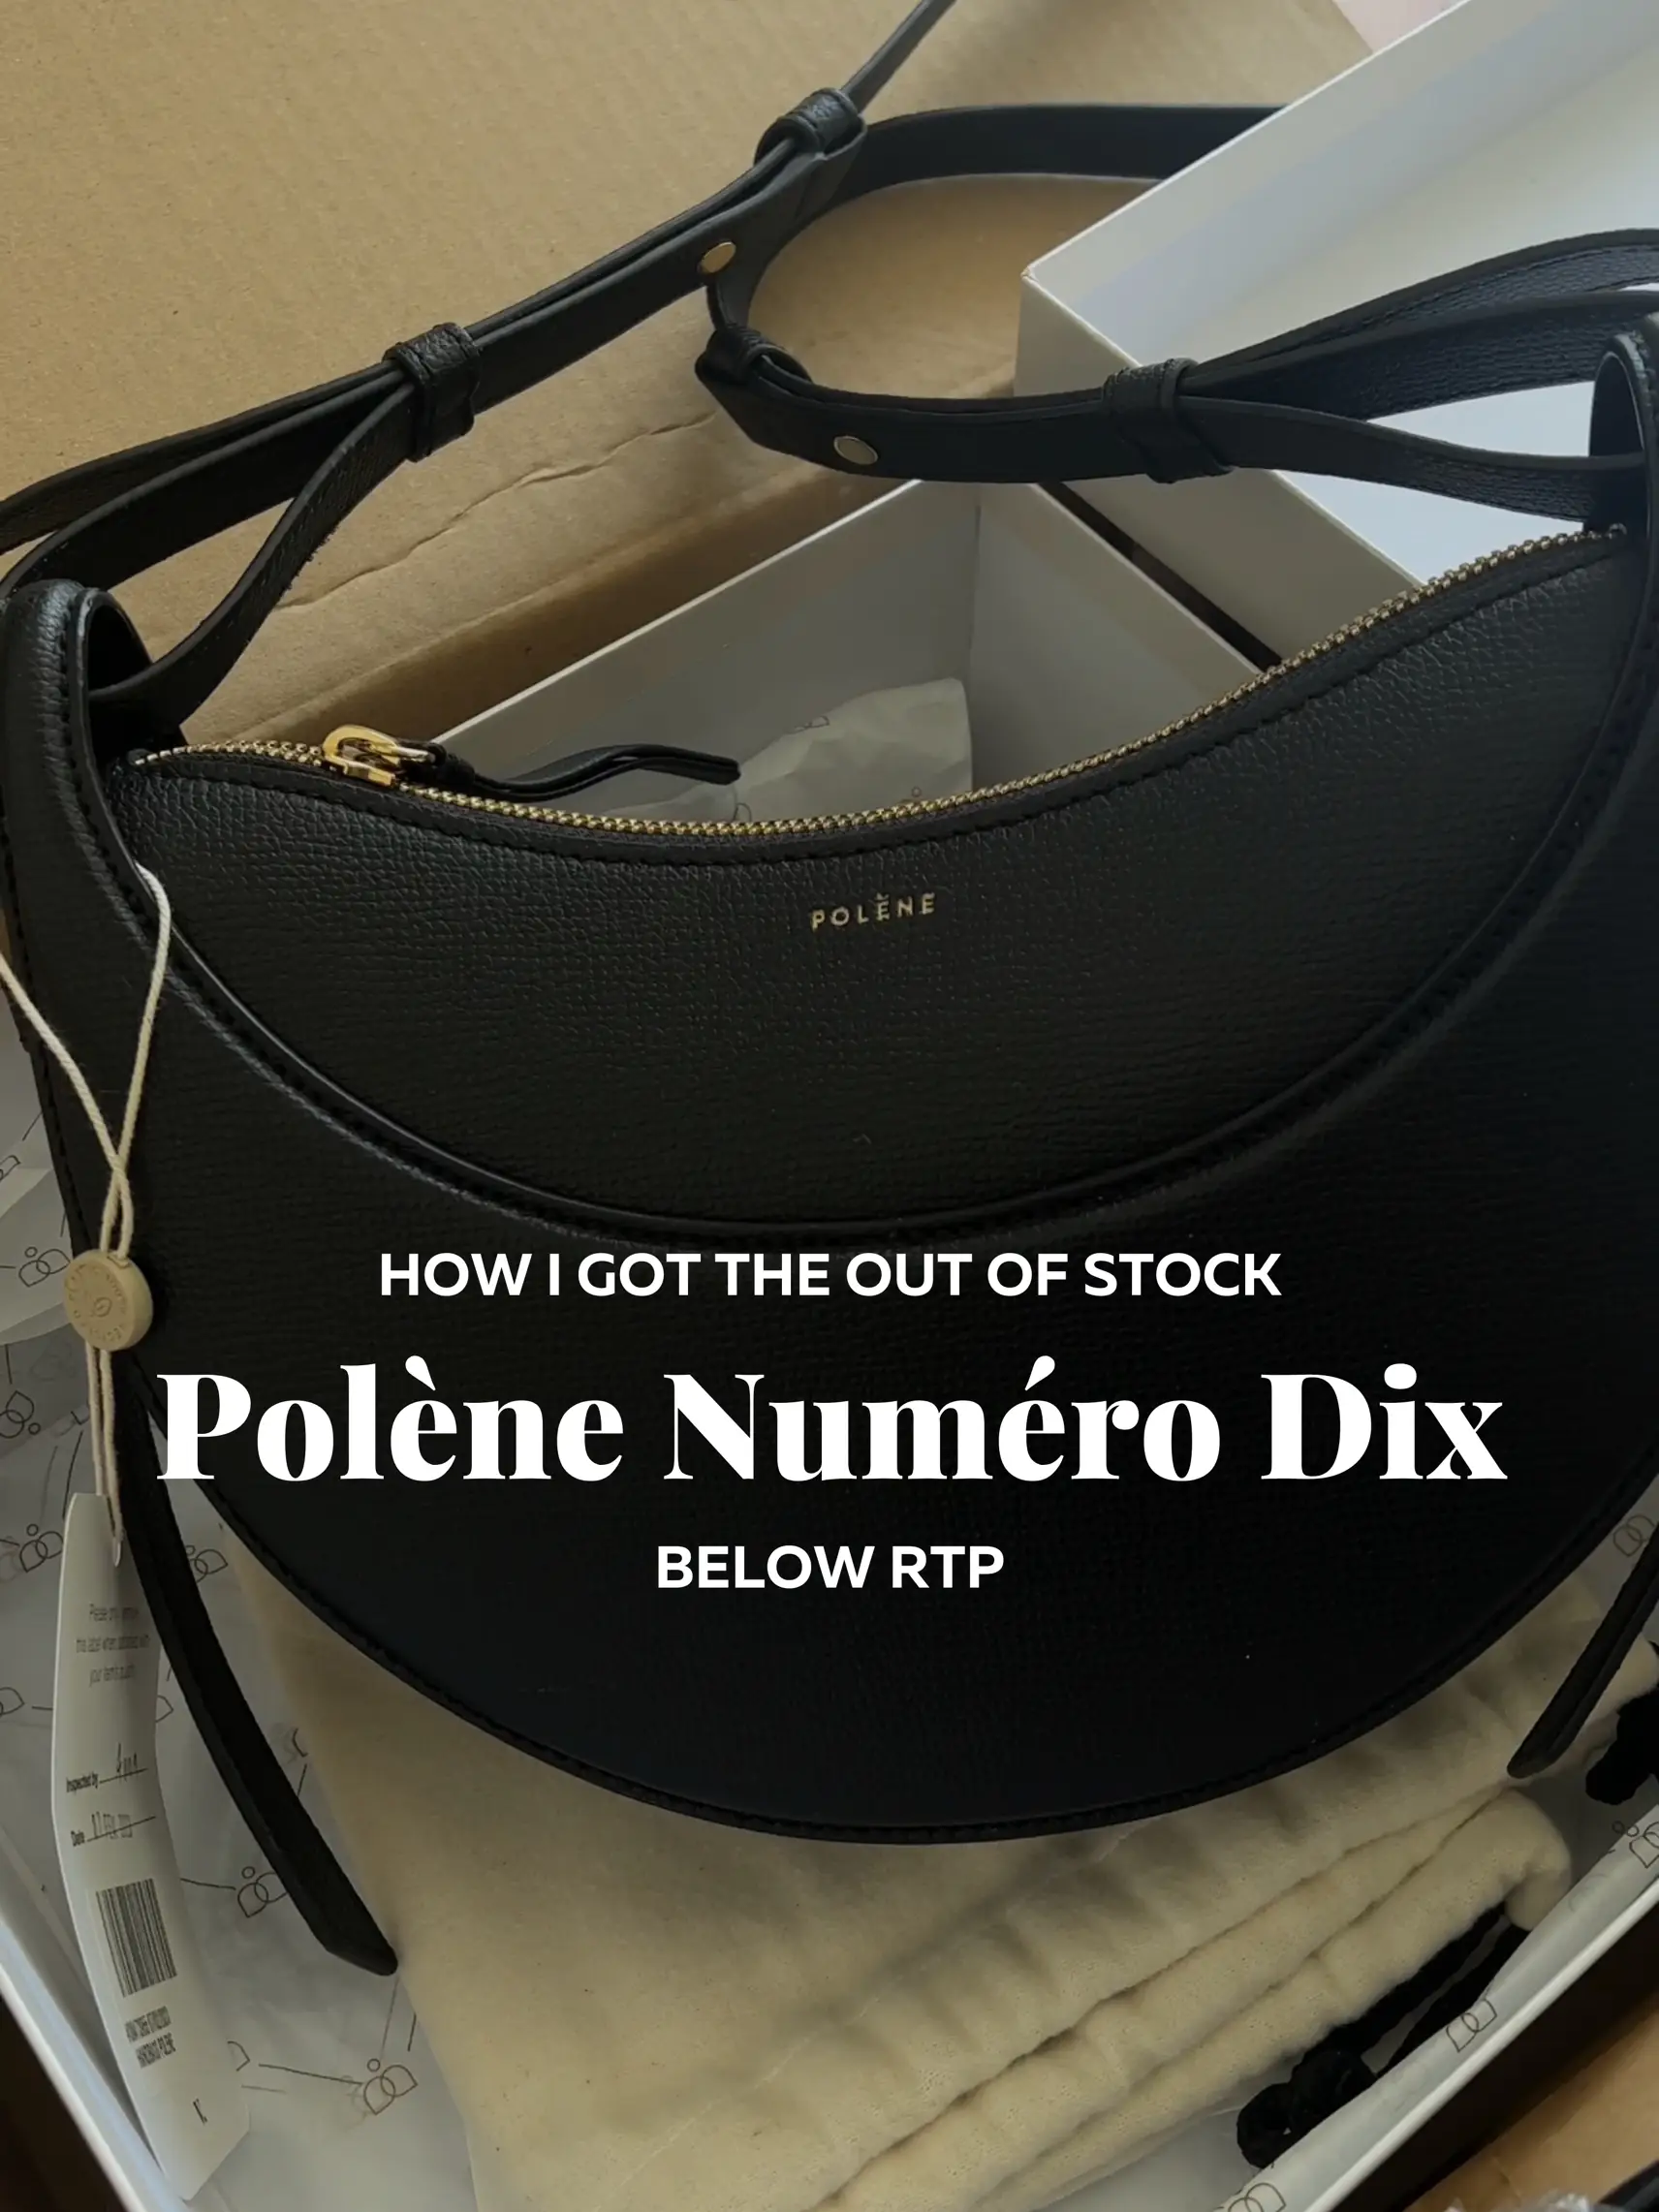 Polene Numero Un - Why are there so many on the resale market? : r/handbags